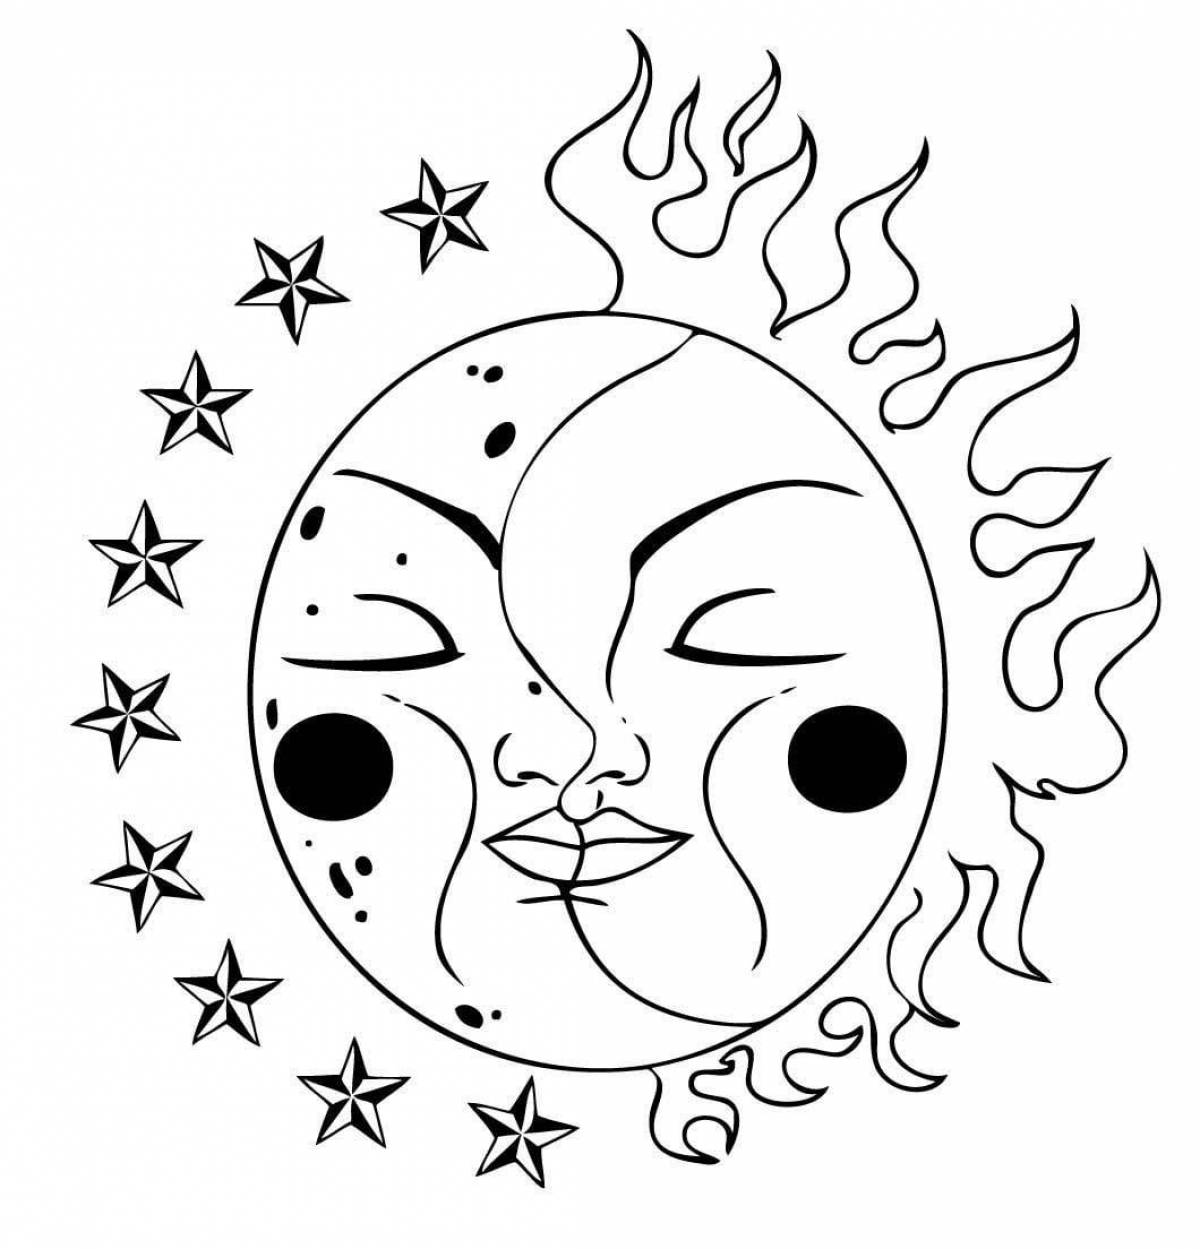 Coloring book gorgeous sun and moon